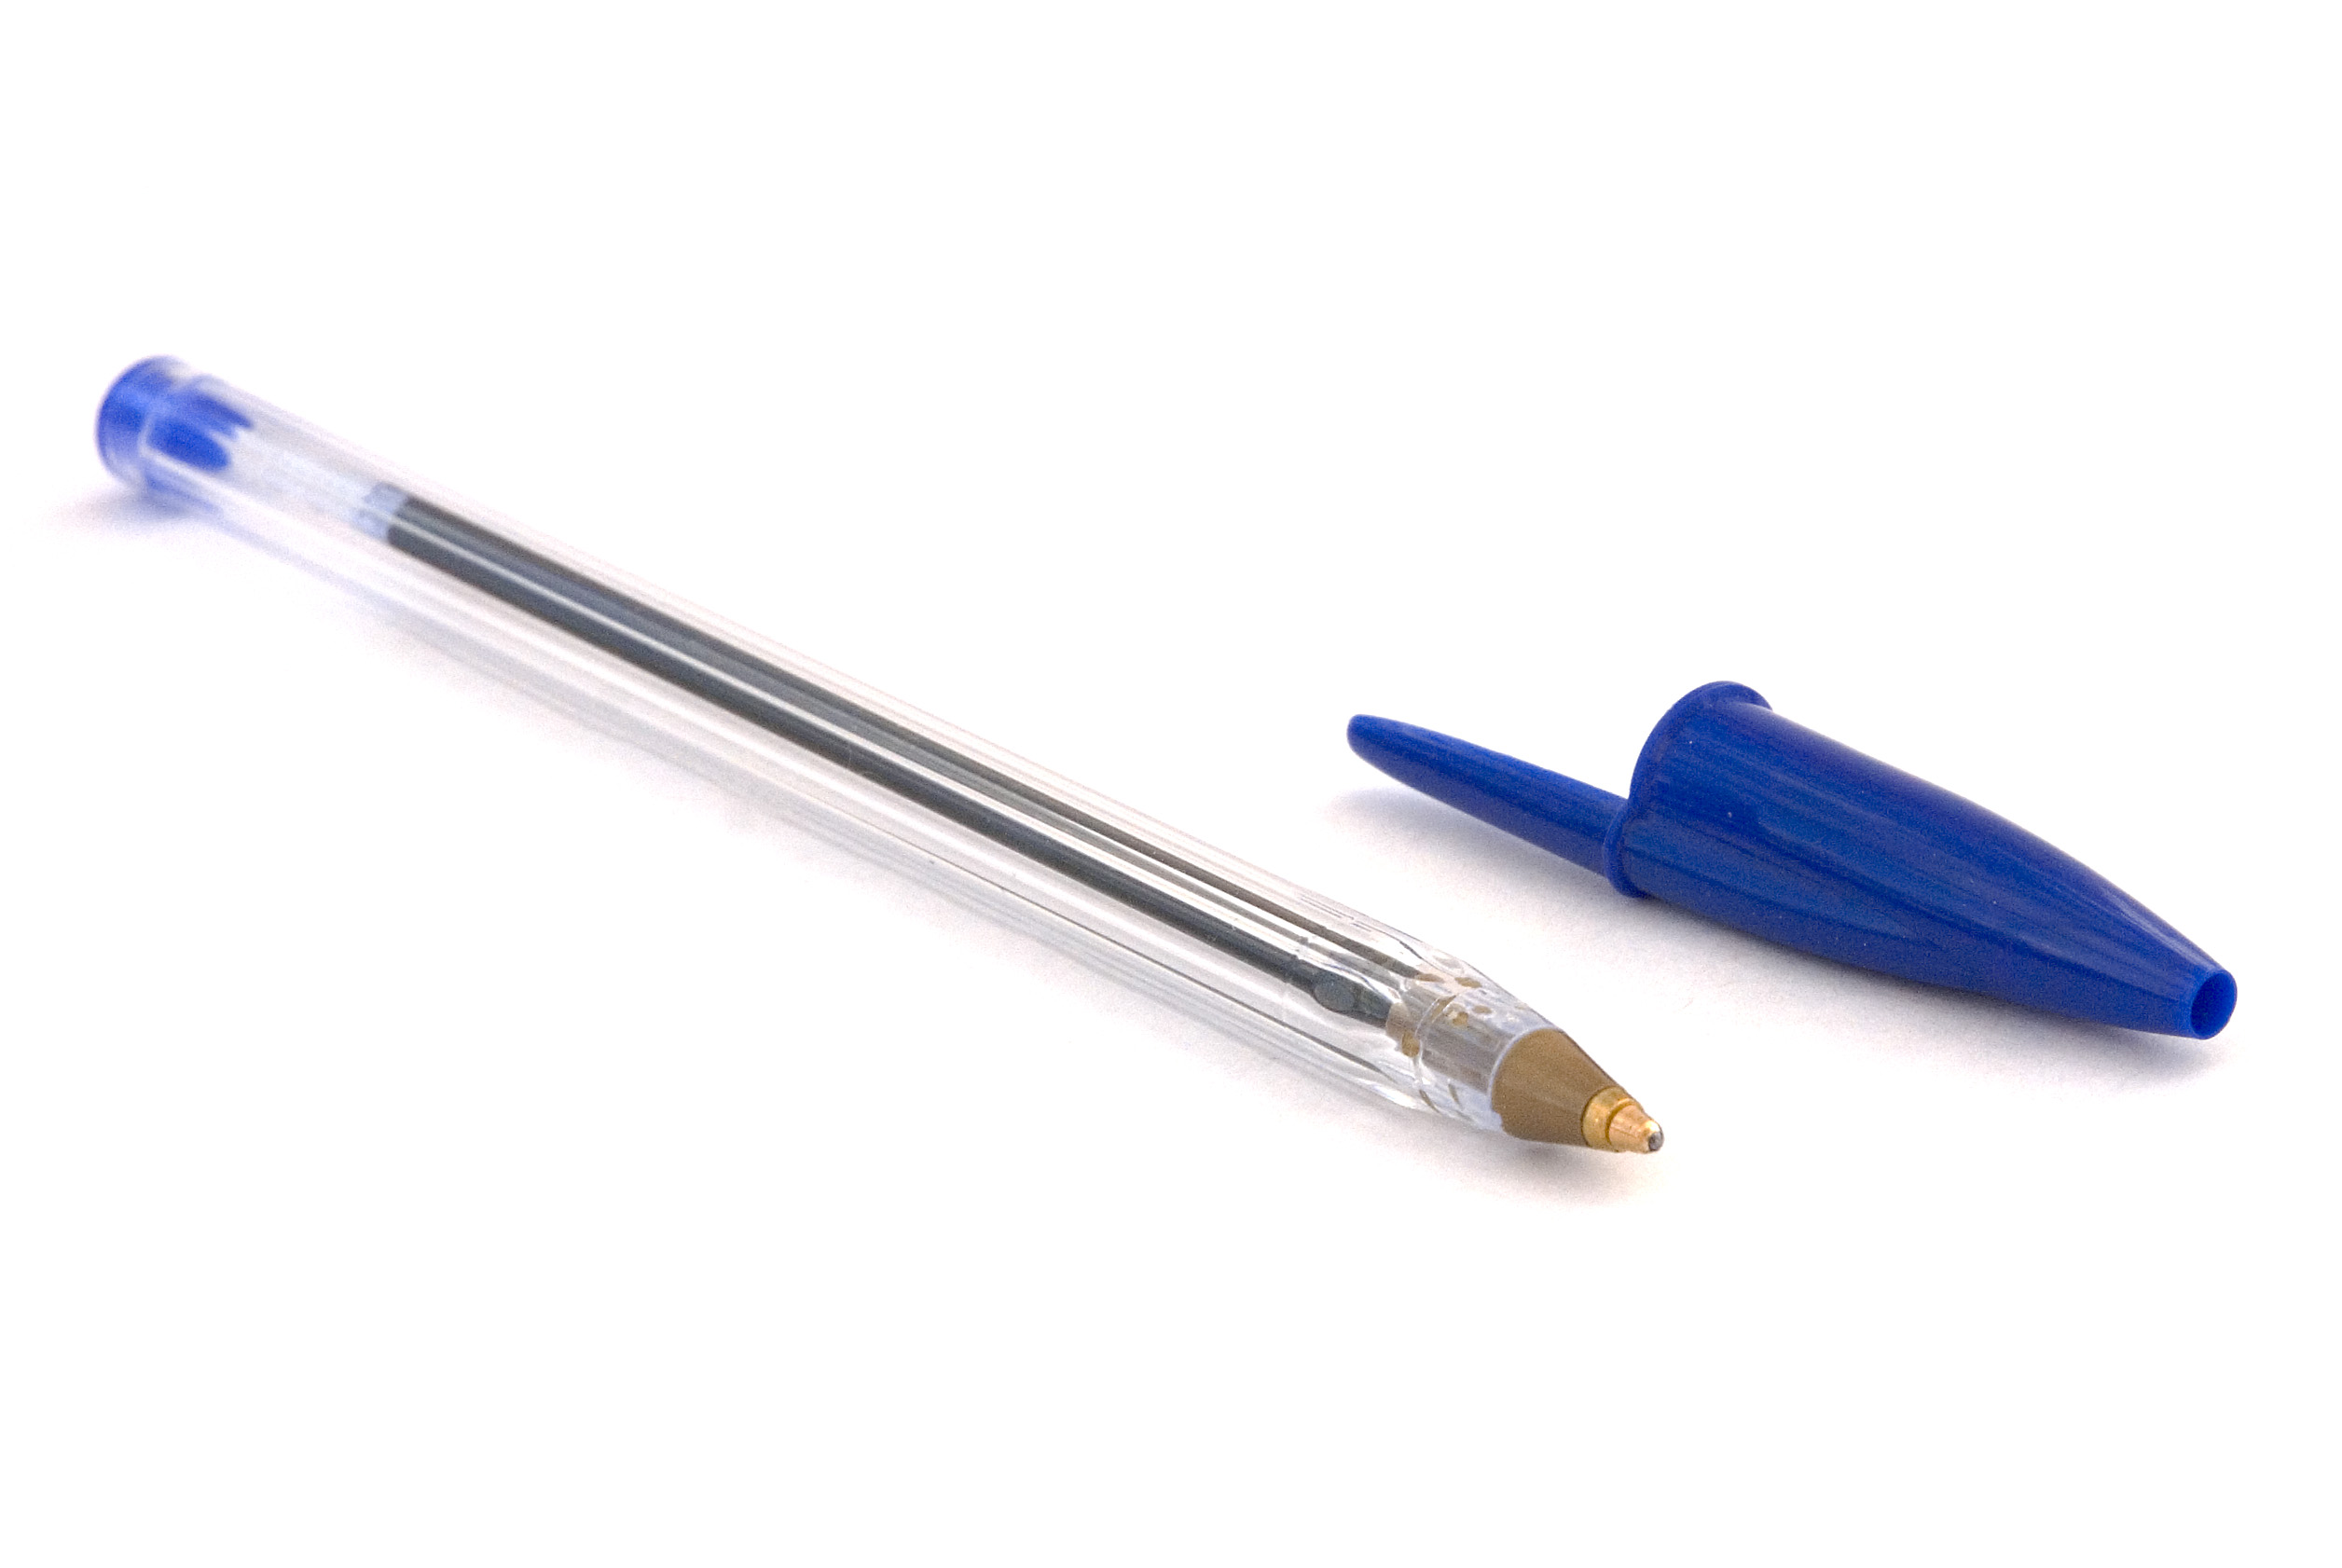 How the Ballpoint Pen Changed the World